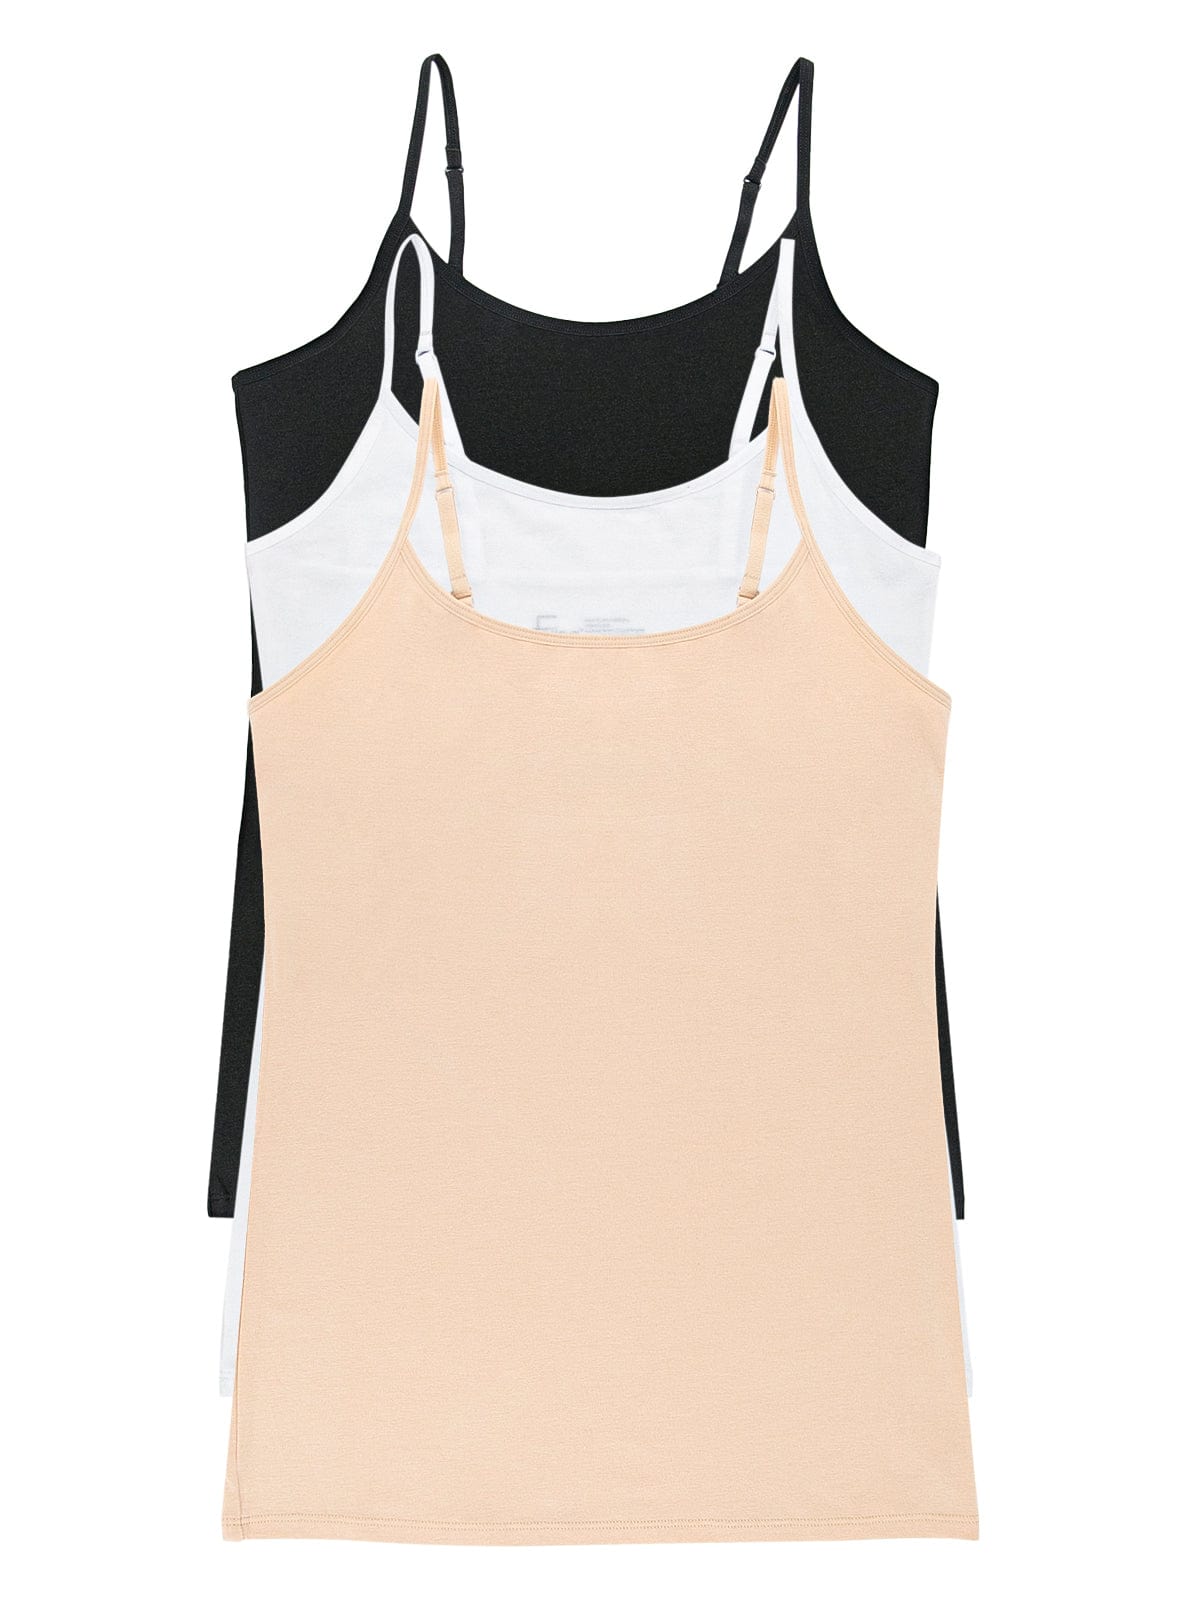 Image of Cotton Modal <br>Stretch Cami